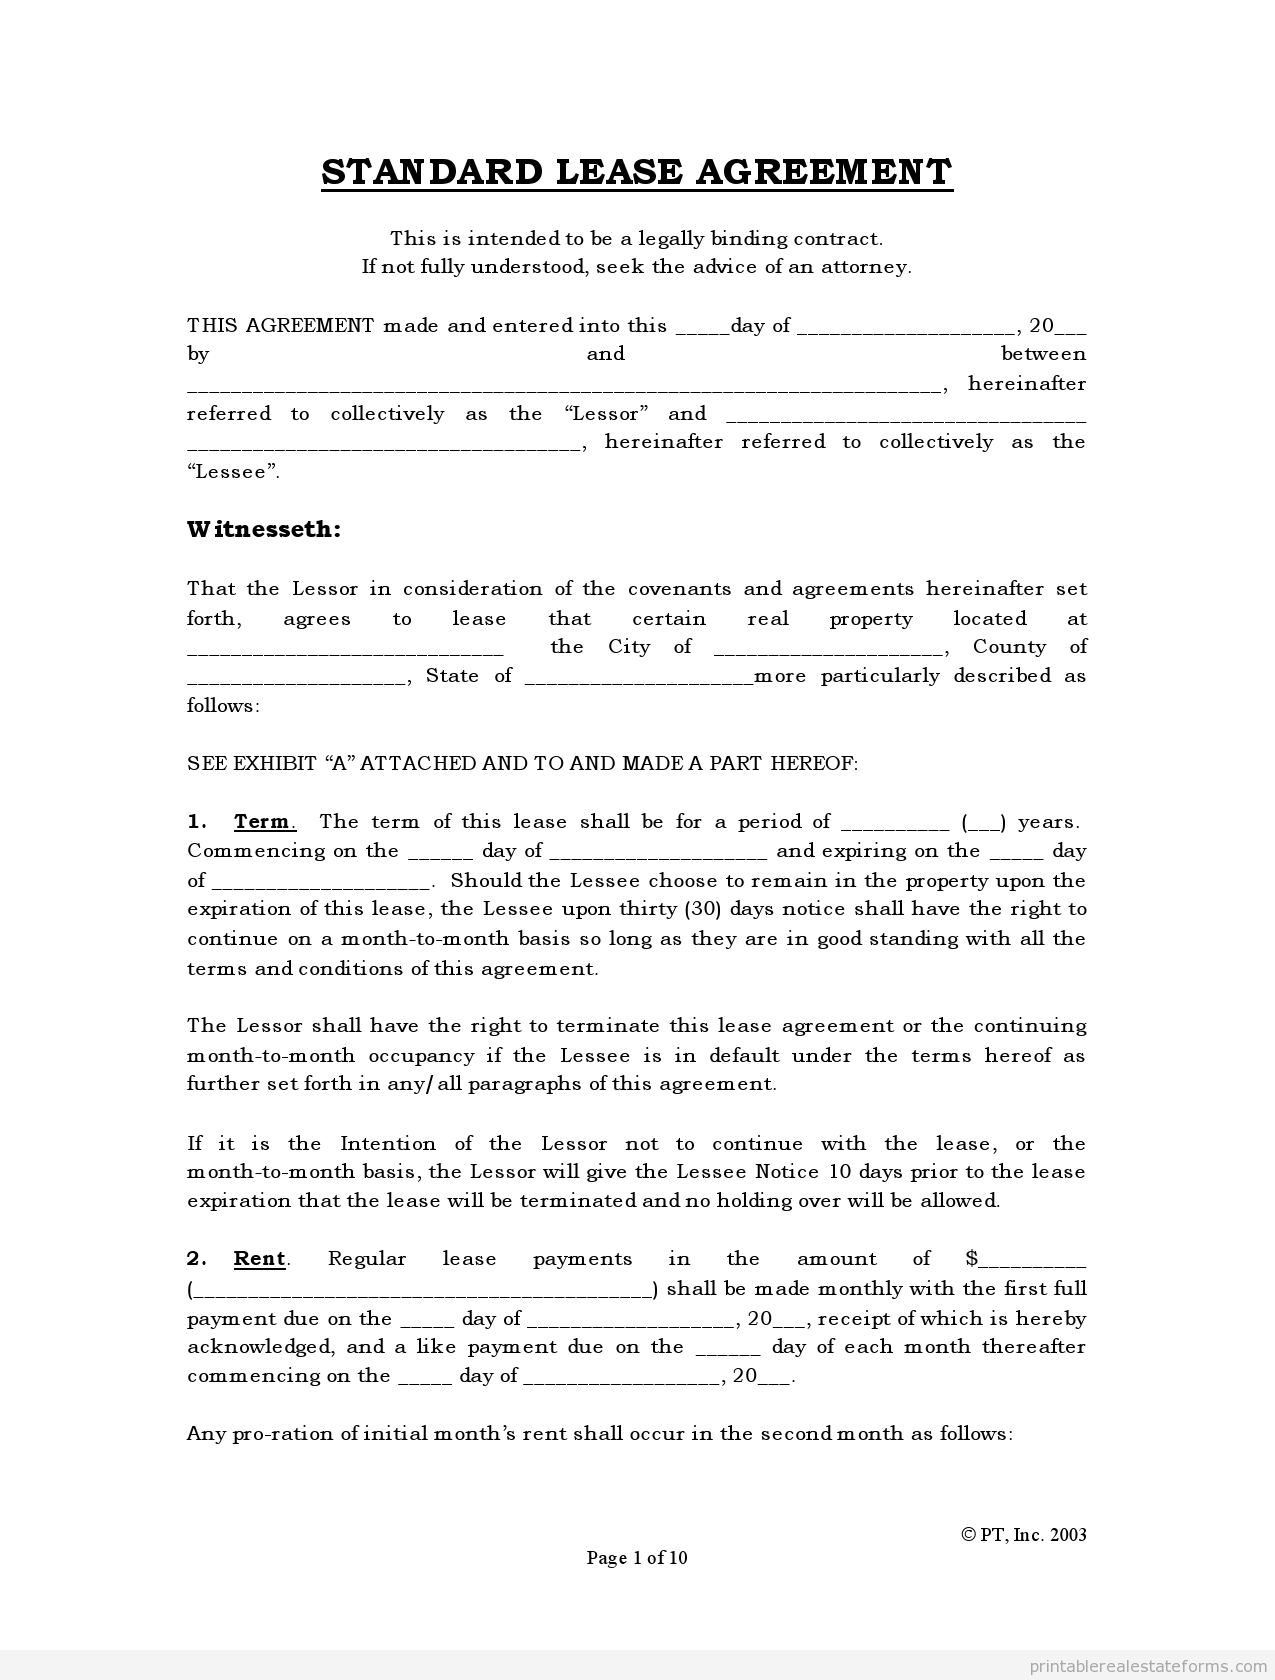 Free Rental Agreements To Print | Free Standard Lease Agreement Form - Free Printable Lease Agreement Forms